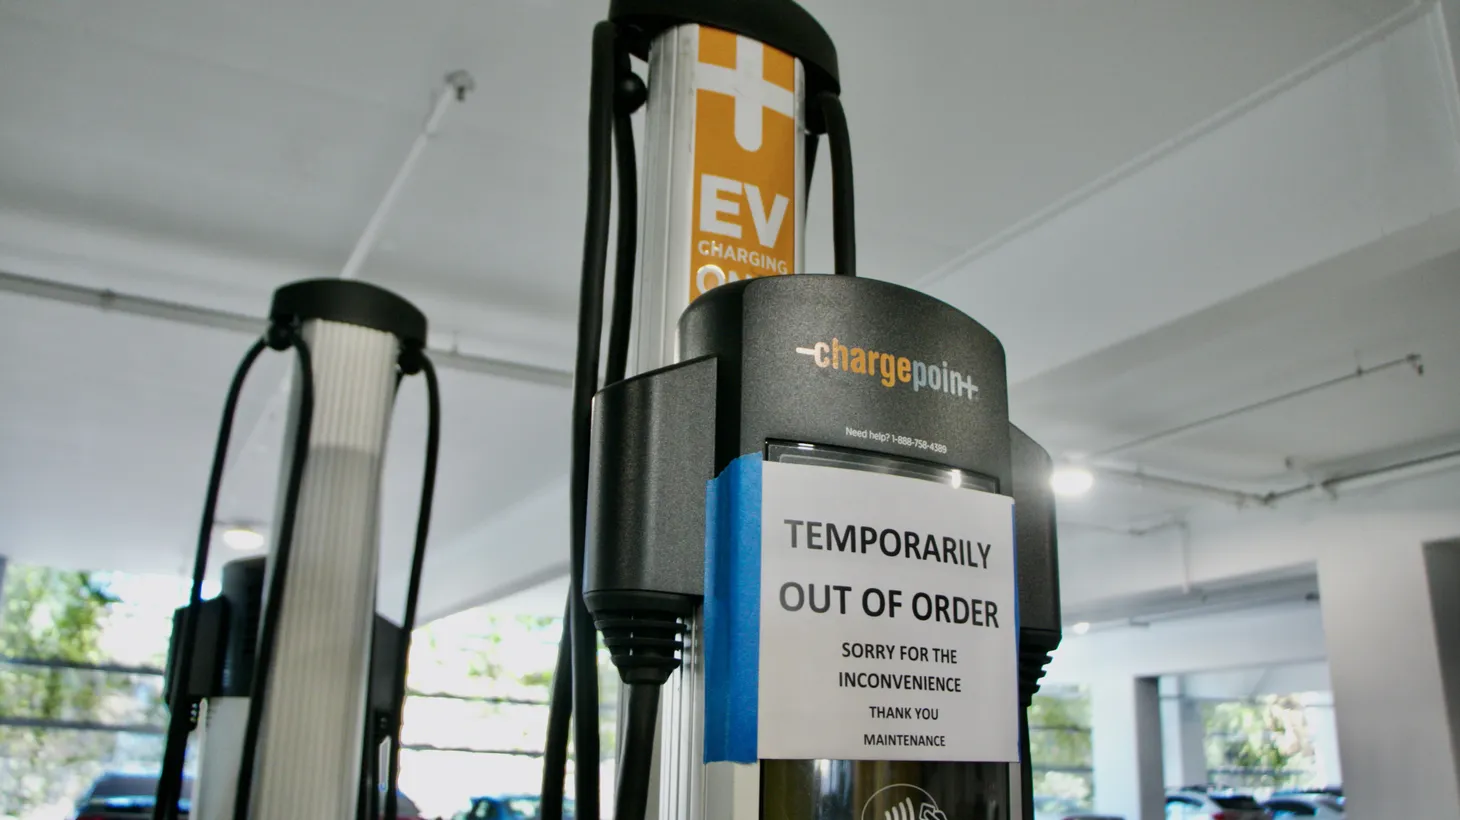 An electric vehicle charging station is out-of-order in a North Hollywood parking garage. The need for efficient repair solutions is expected to grow as more drivers go electric.